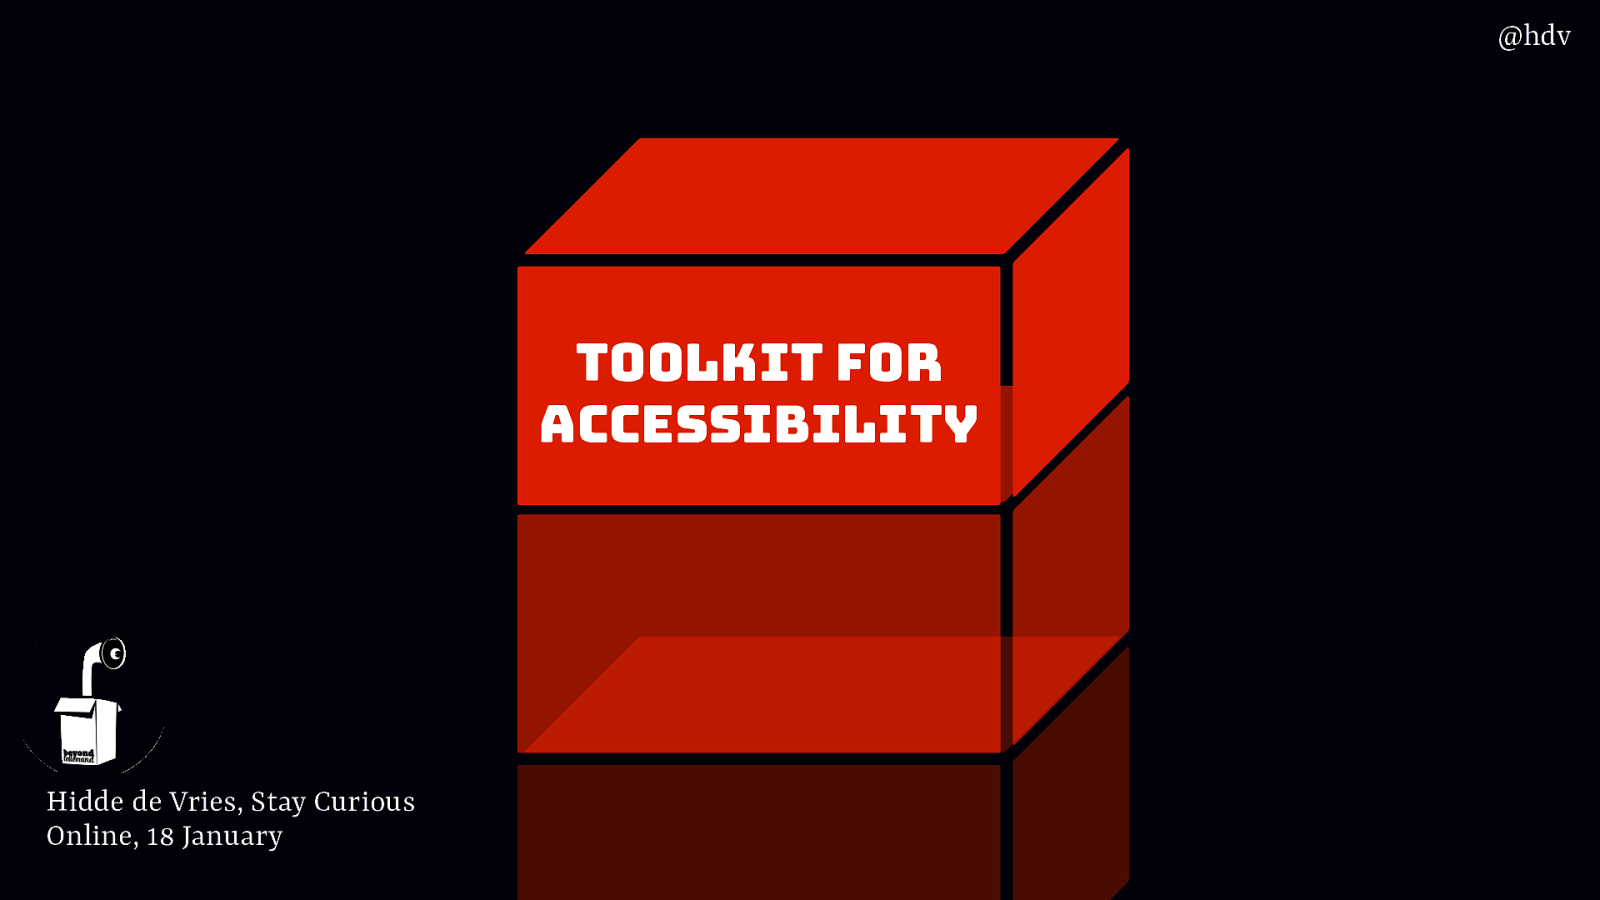 A toolkit for web accessibility